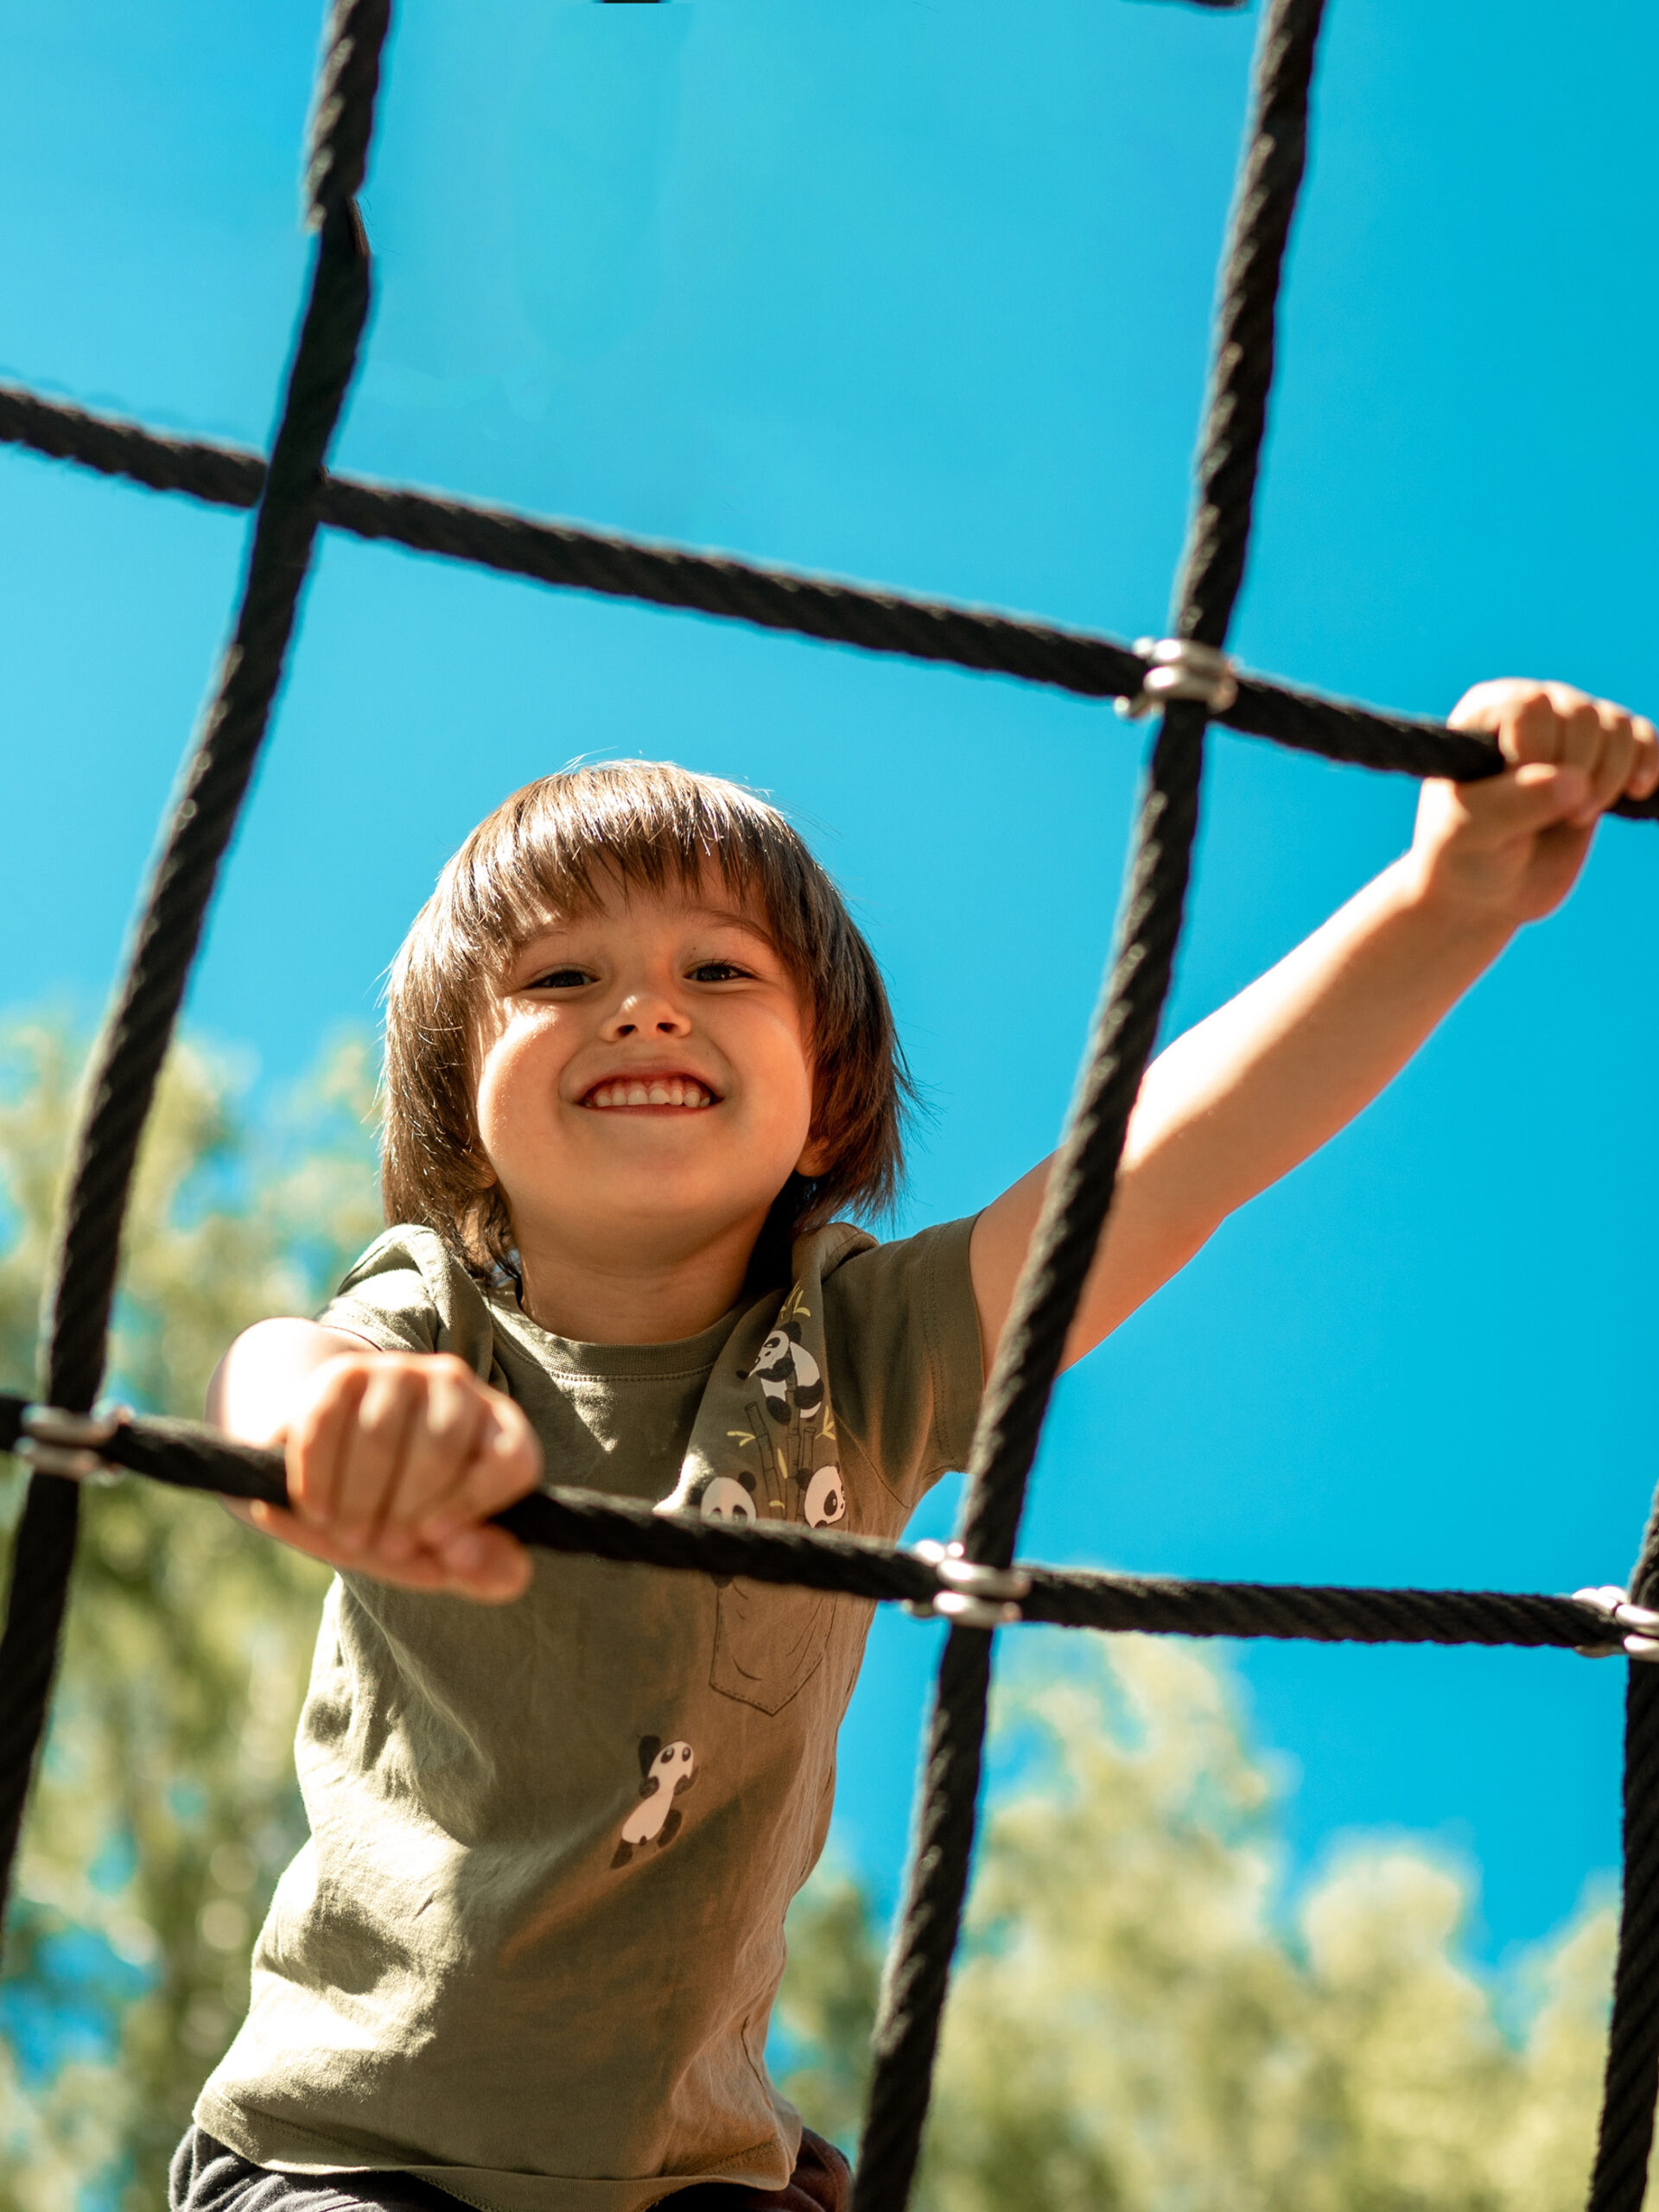 Child plays on jungle gym and smiles - 5 ways to keep kids cool during hot summer weather